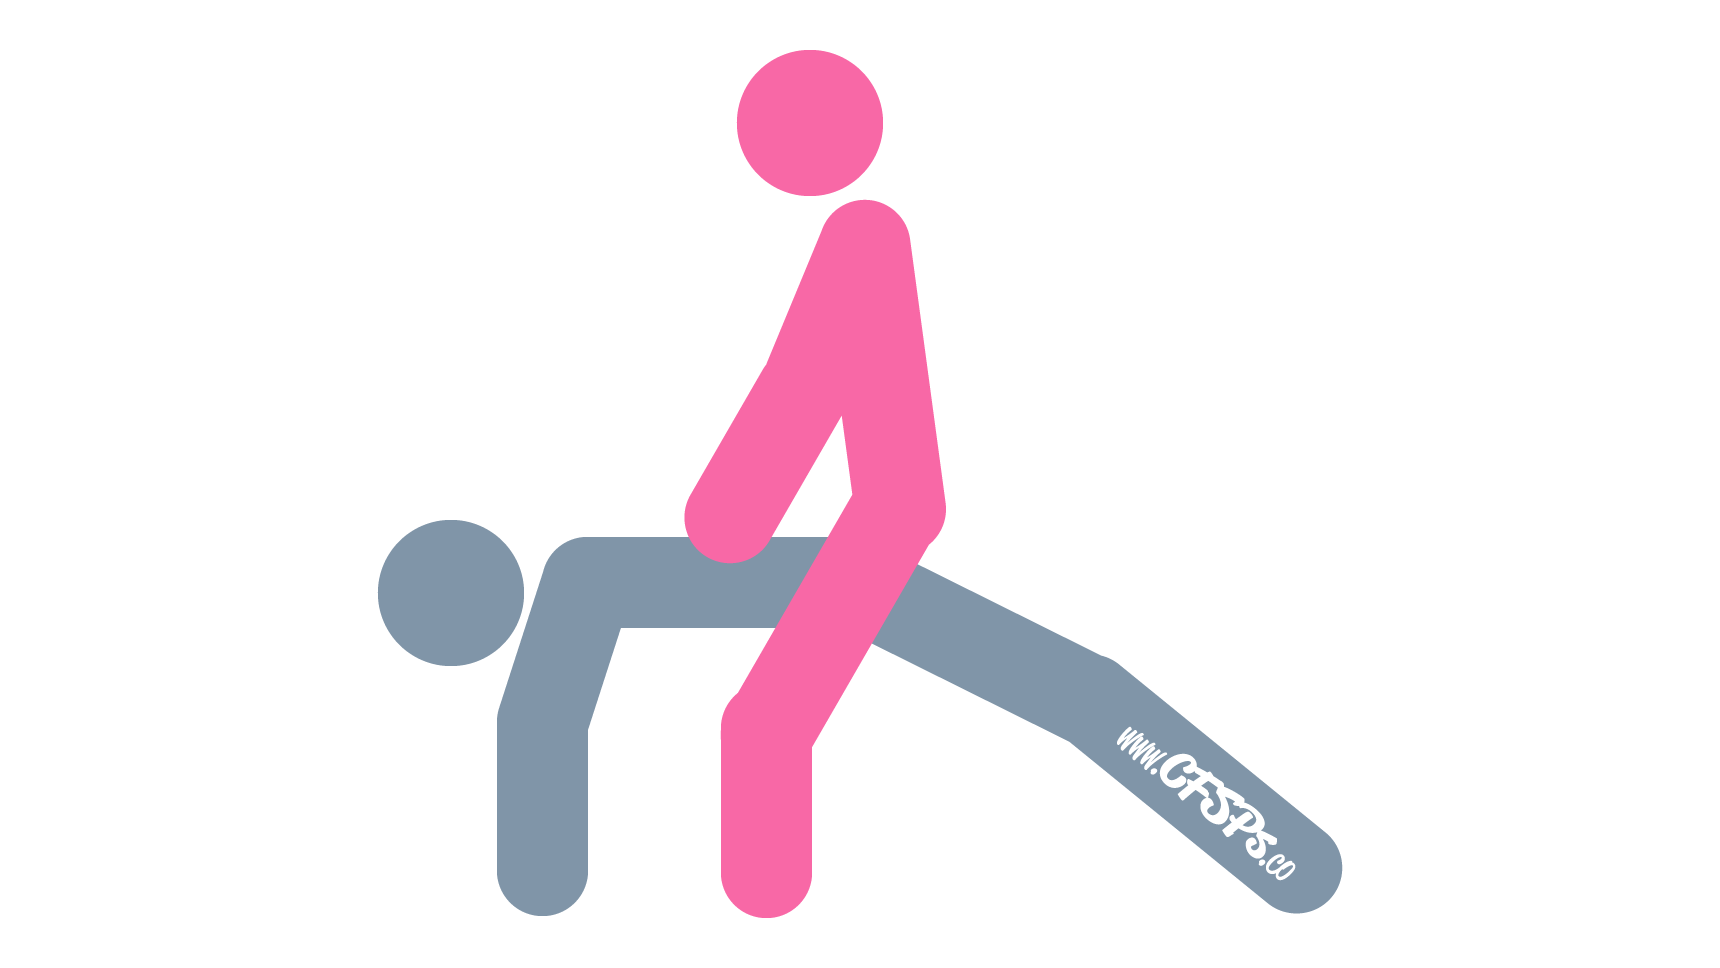 This stick figure image depicts a man and woman having sex in the Bridge sex position. The man positions his body with his feet on the ground, knees bent, pelvis facing up, and arms holding up his upper body. The woman stands over him and straddles his pelvis while facing him.